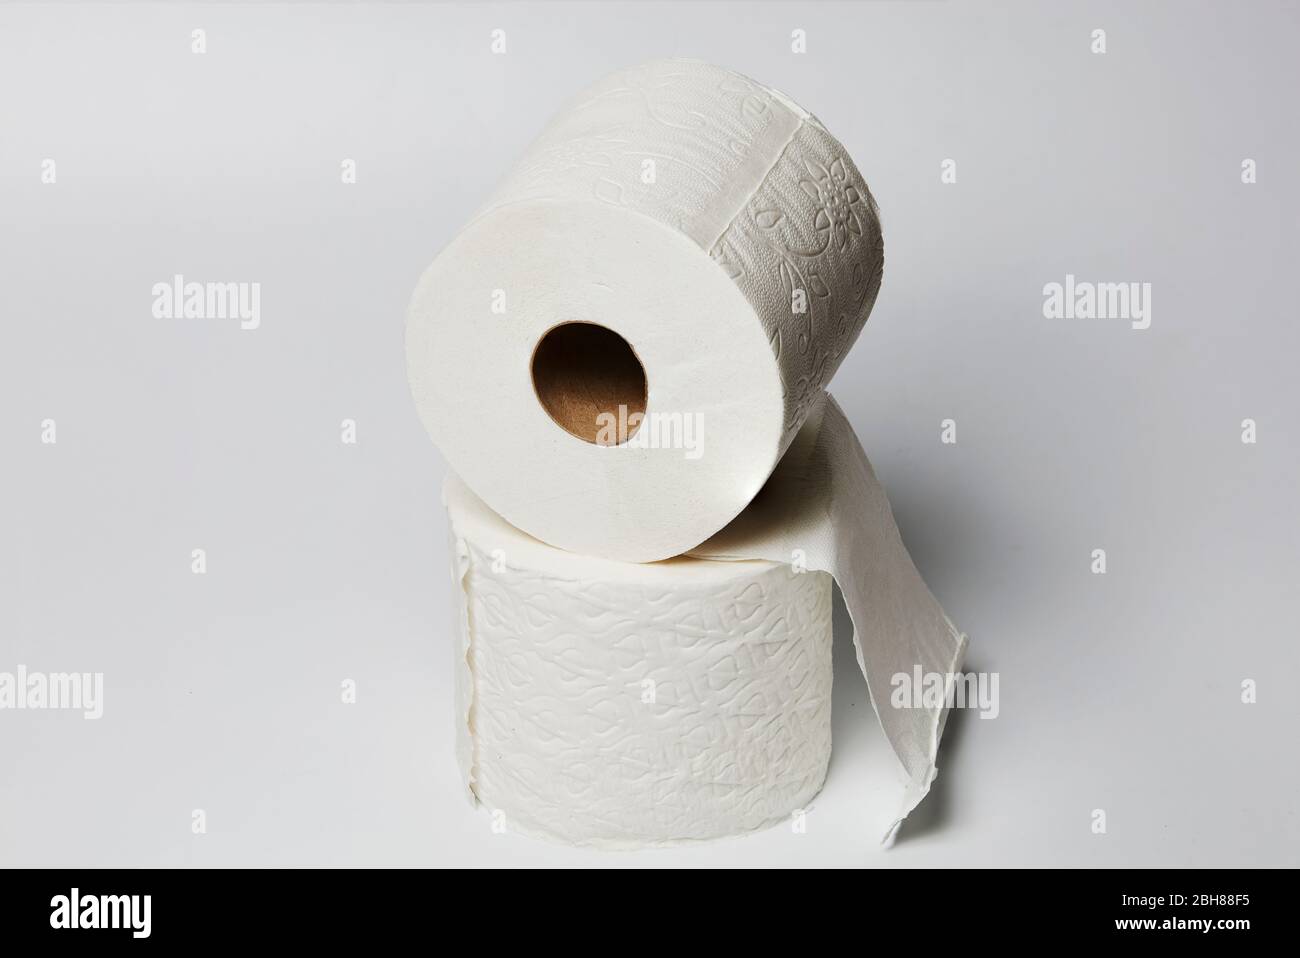 still life of two rolls of toilet paper on white background Stock Photo